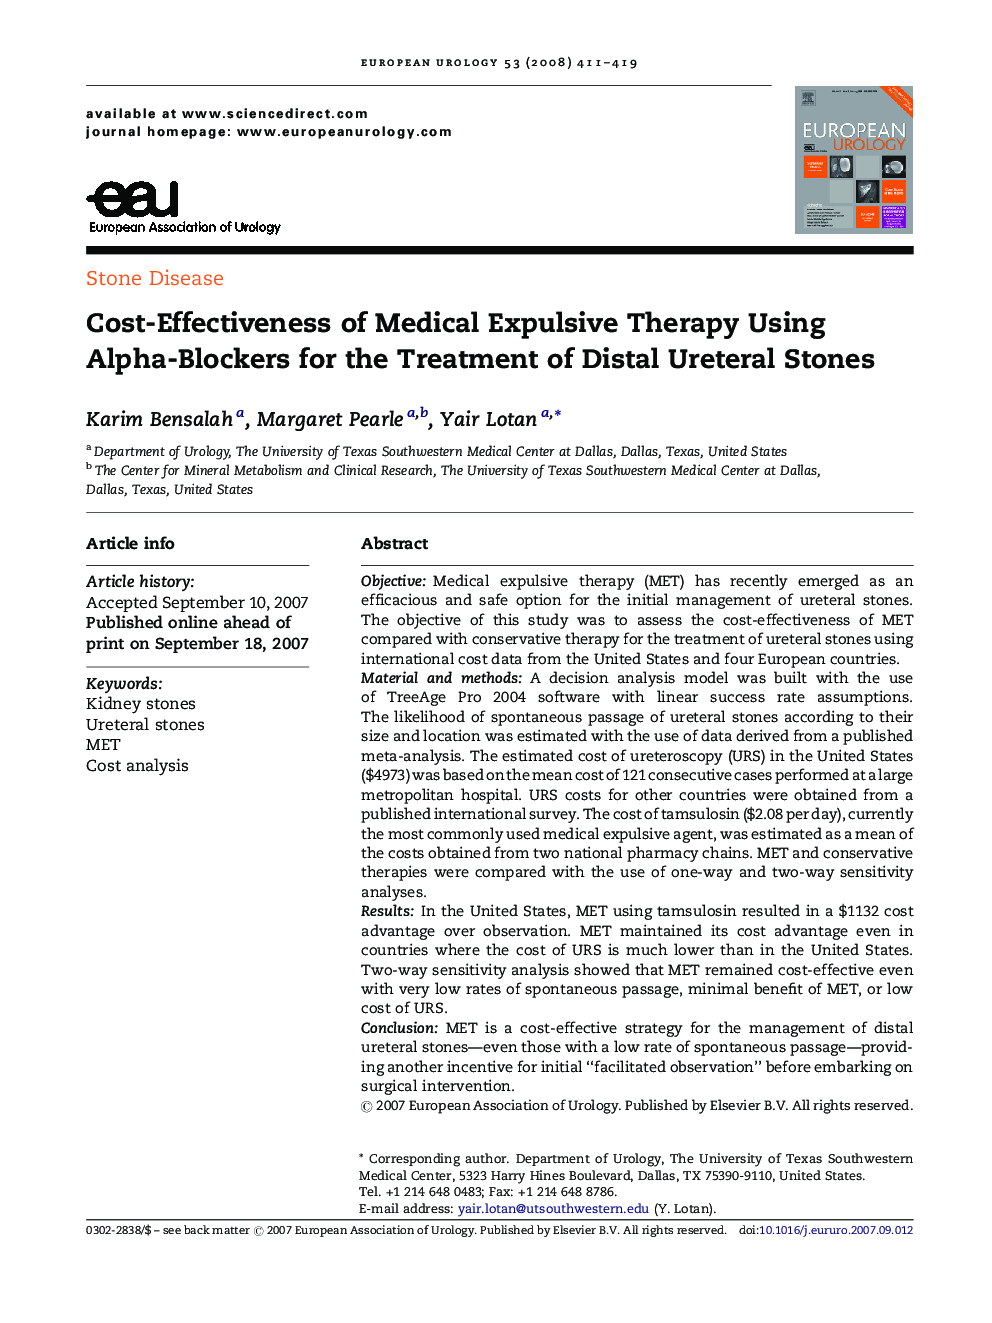 Cost-Effectiveness of Medical Expulsive Therapy Using Alpha-Blockers for the Treatment of Distal Ureteral Stones